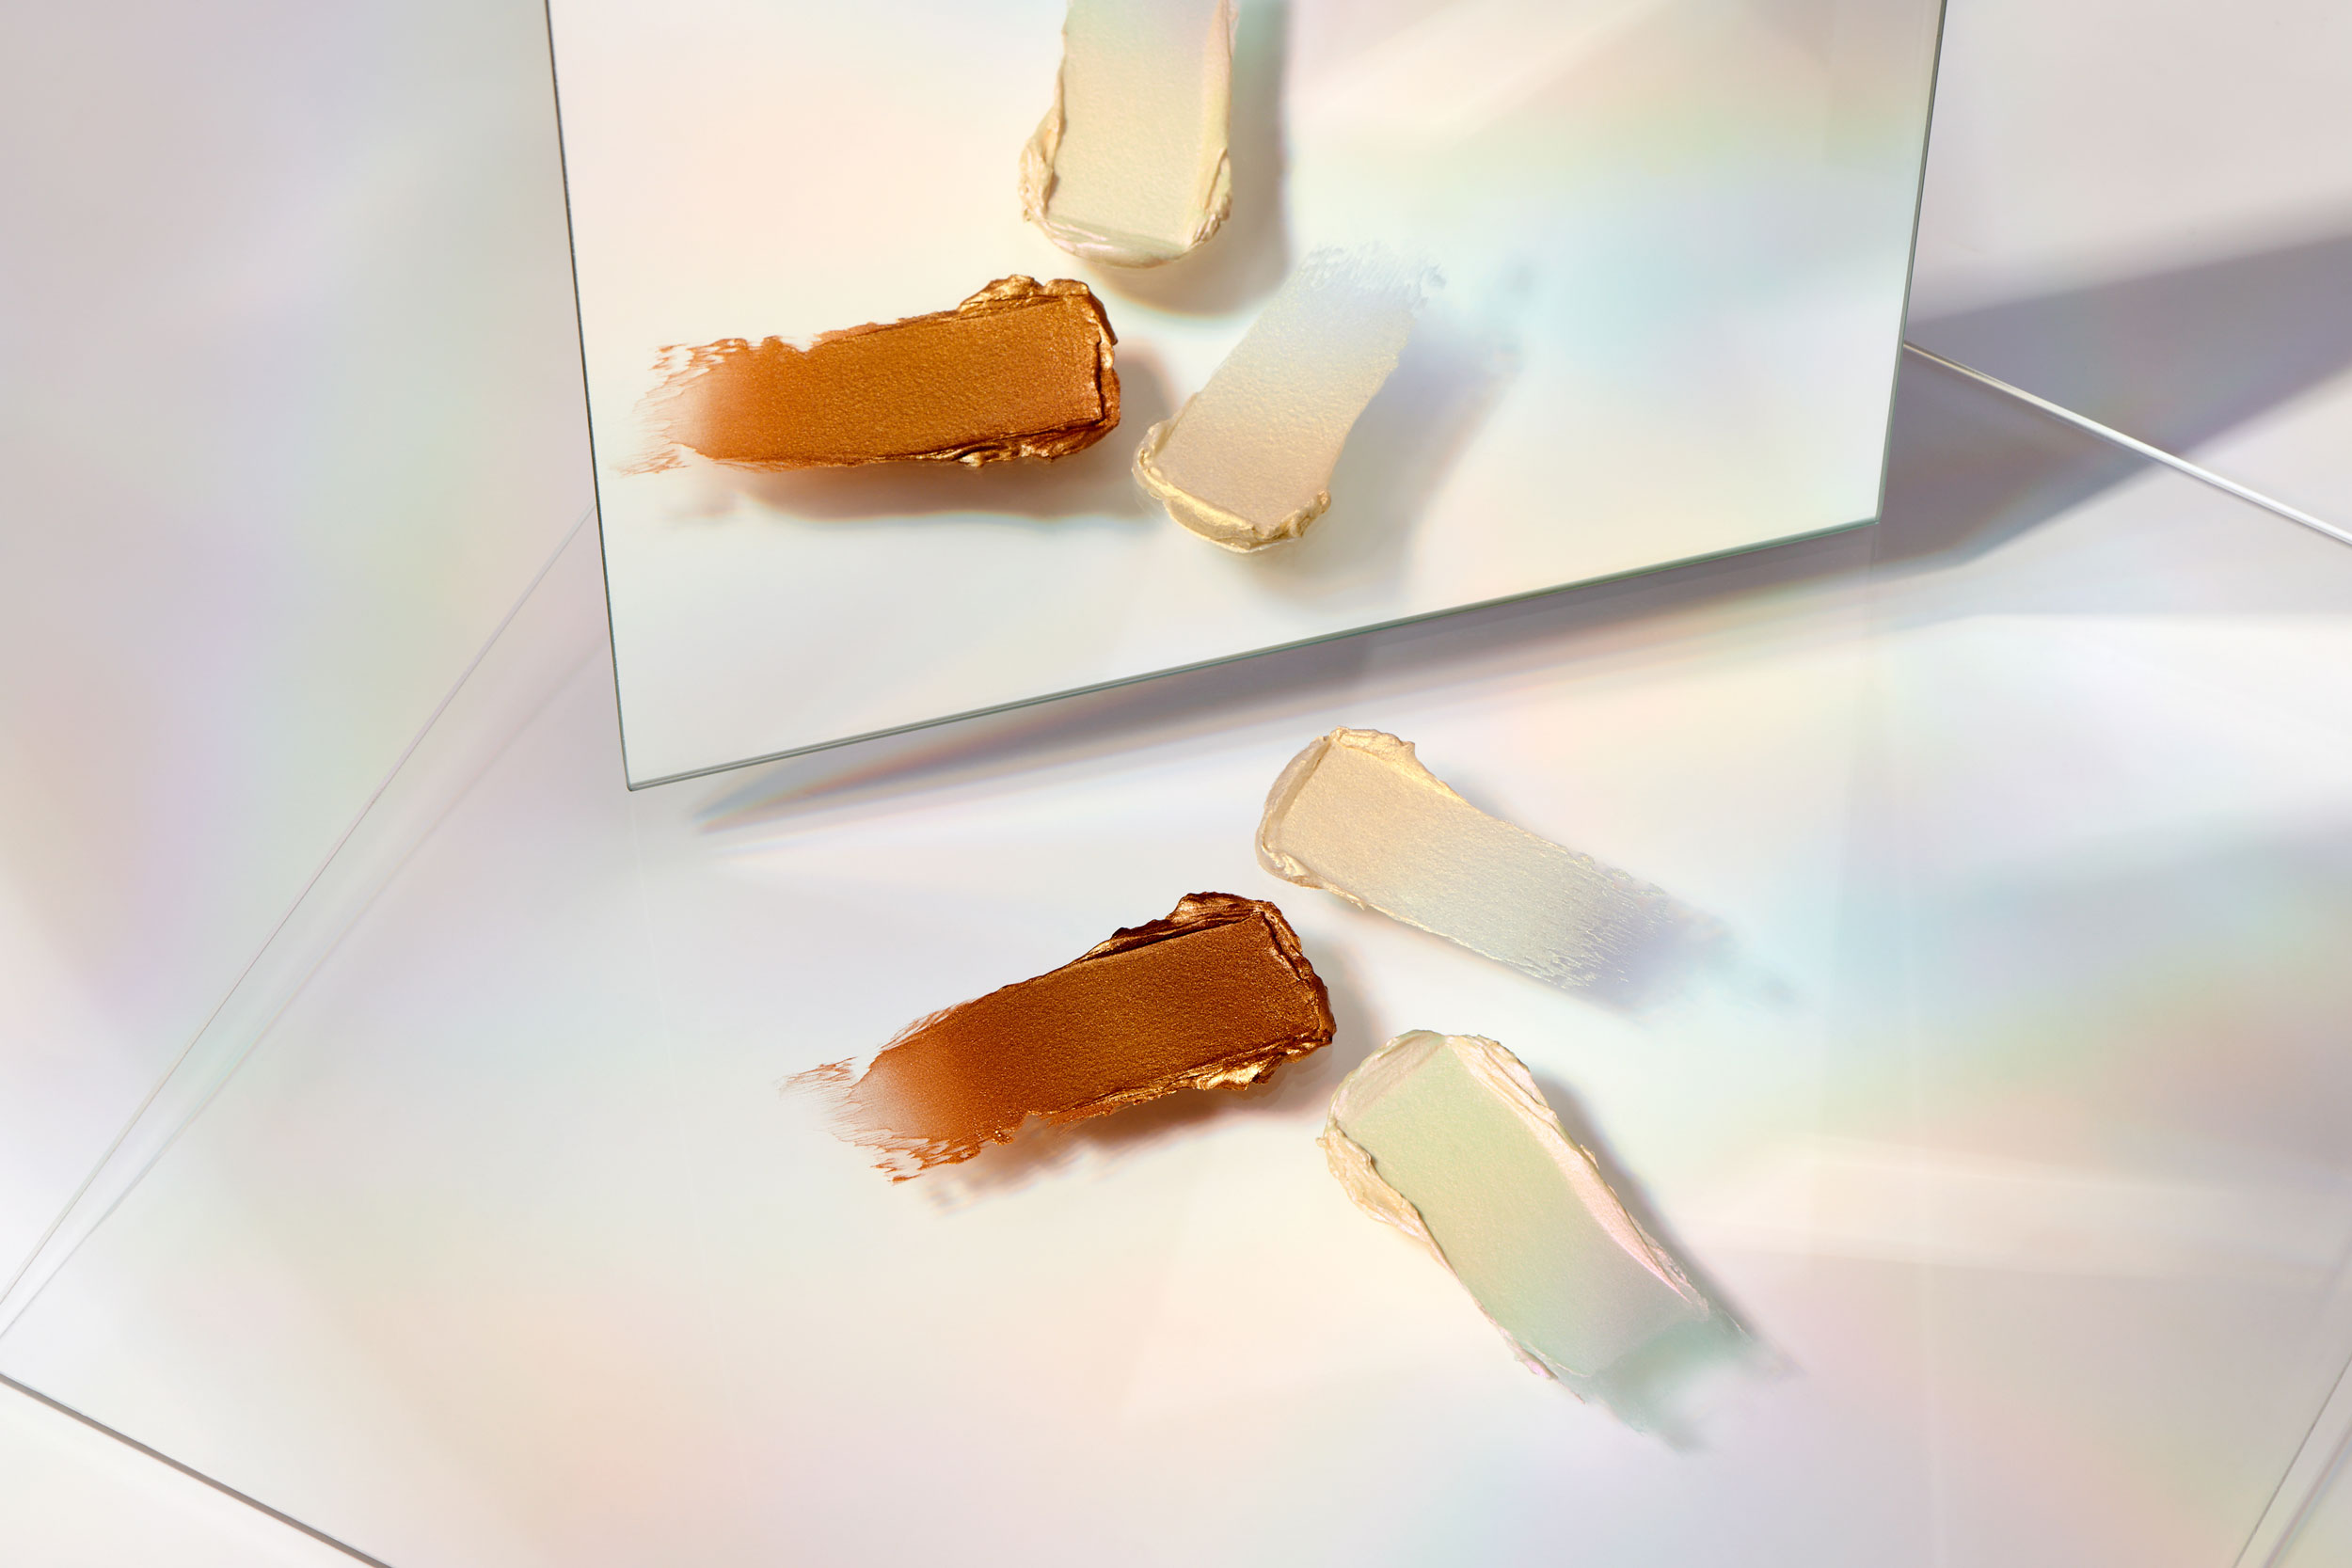 Three makeup swatches on clear surface with mirror reflection